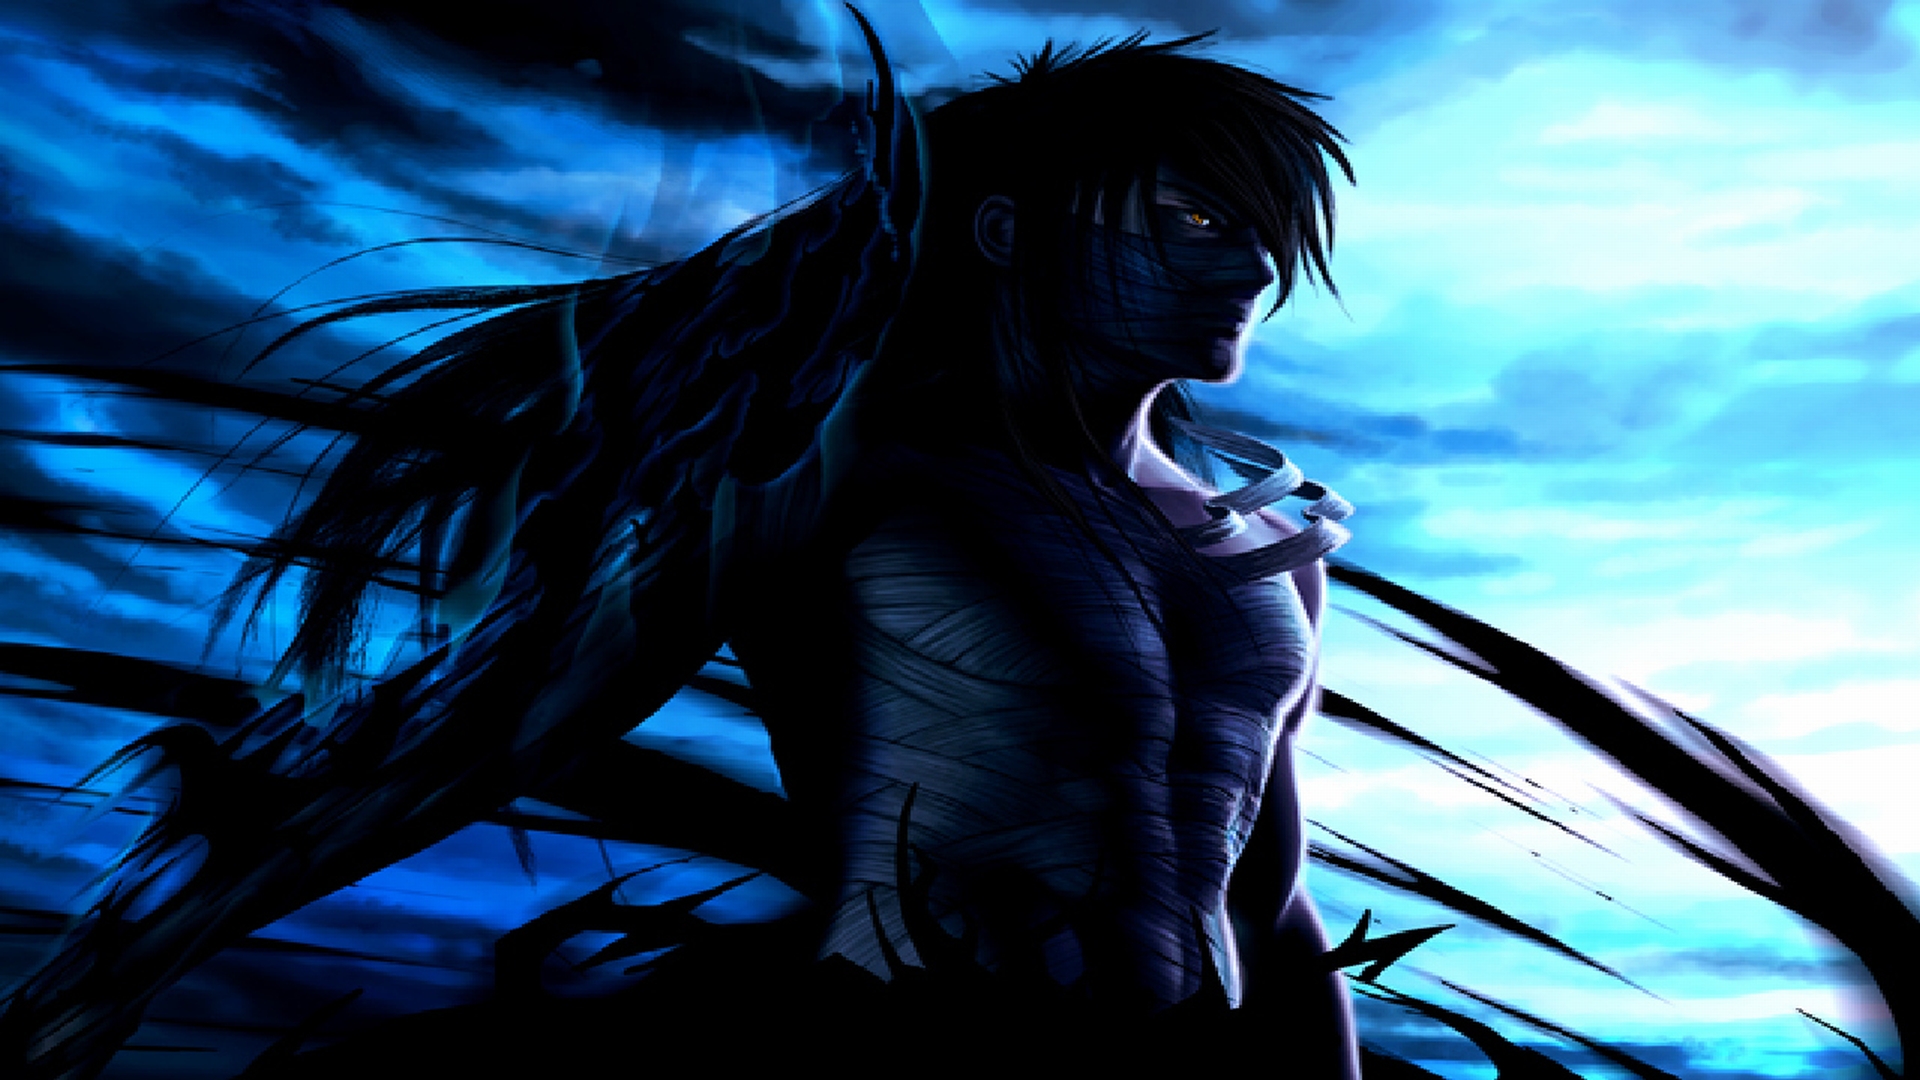 Pictures anime bleach wallpapers HD  Anime wallpaper iphone Bleach  anime Anime wallpaper 1920x1080